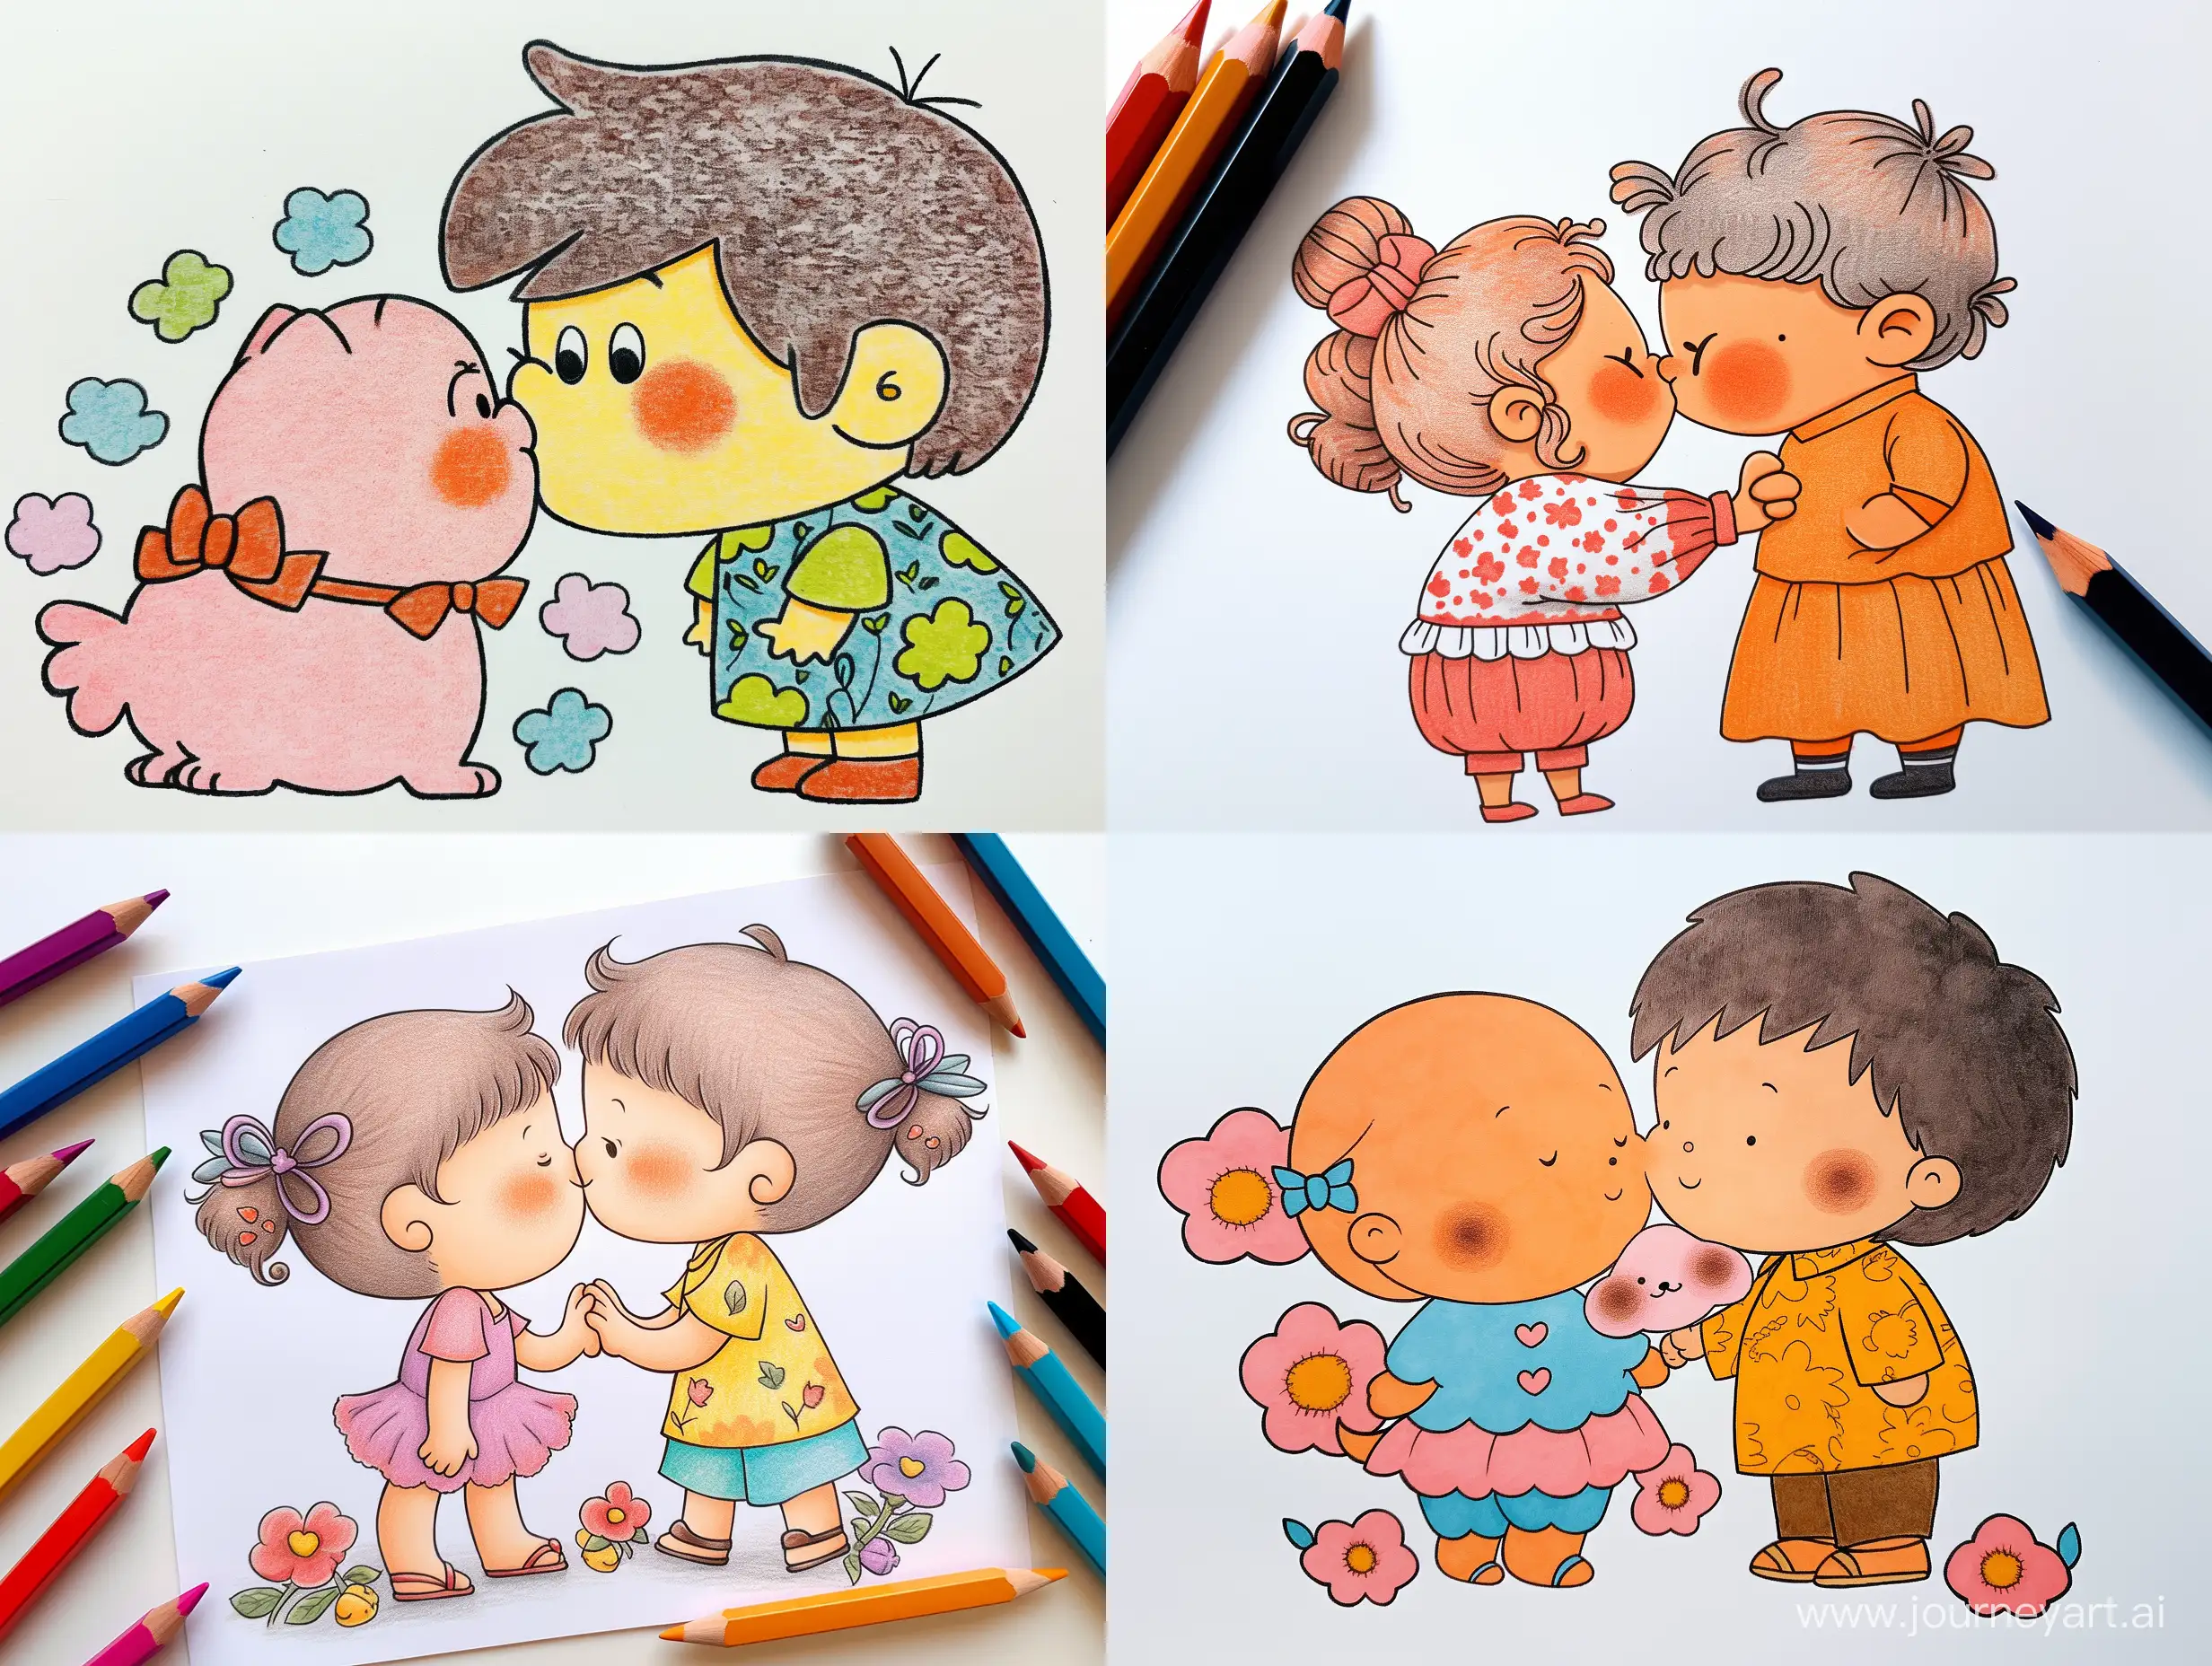 Vibrant-Valentines-Doodle-Playful-Kisses-in-BubertInspired-Style